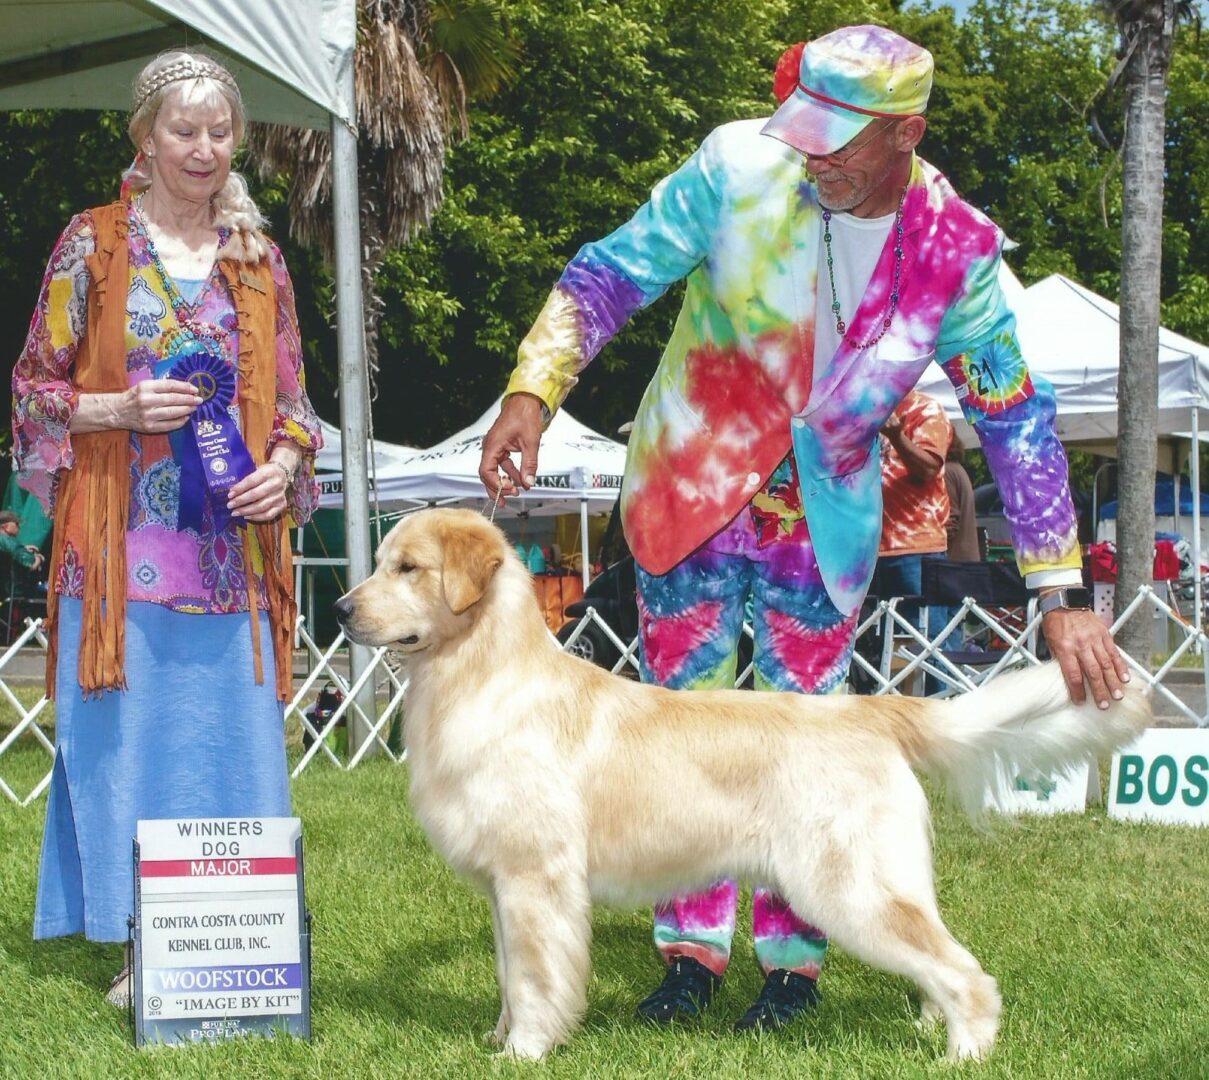 Two people standing next to a golden retriever at a dog show.